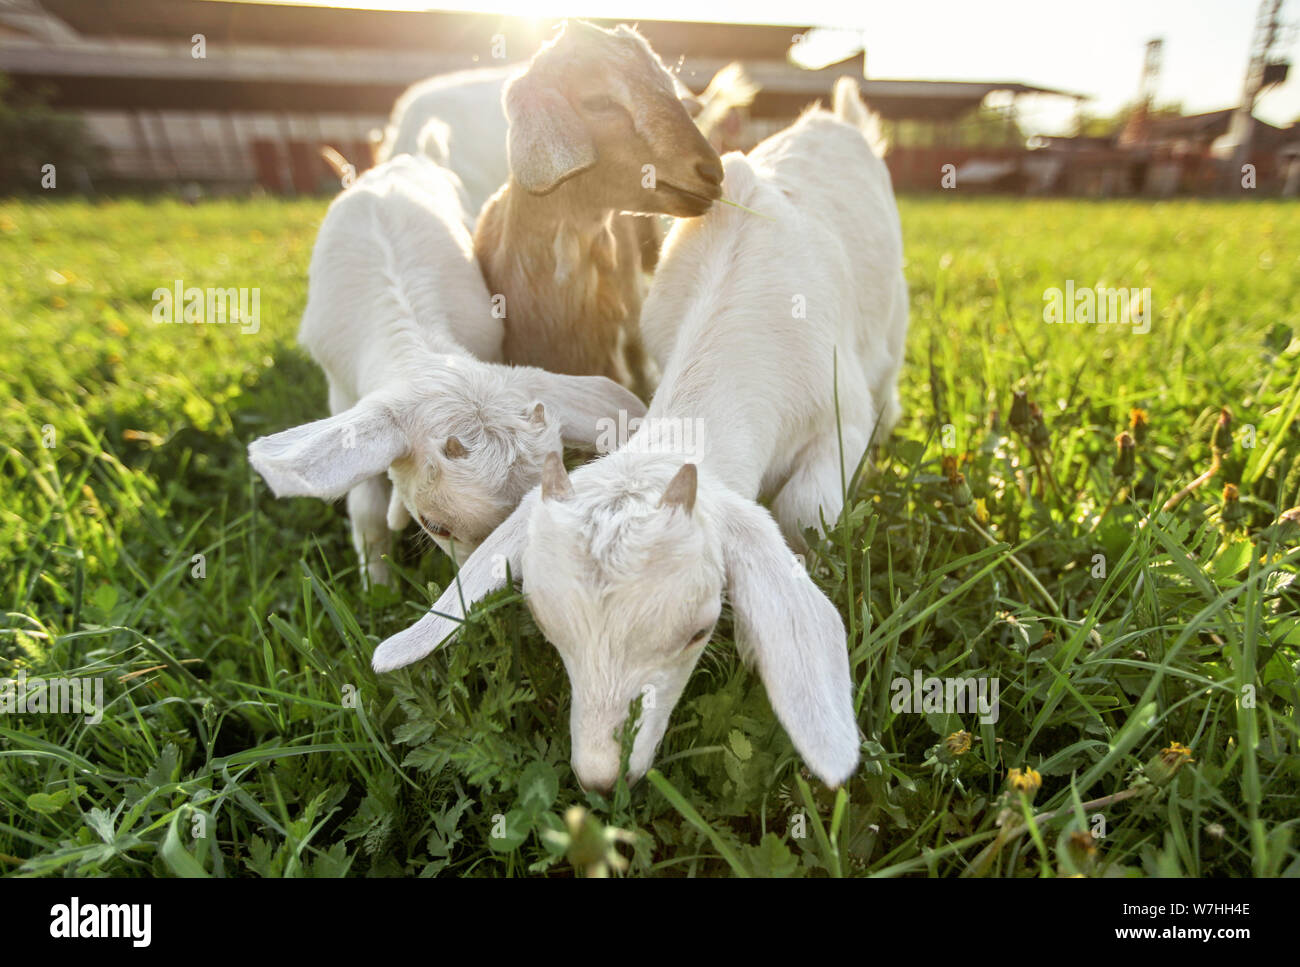 Three goat kids grazing on spring grass, strong sun backlight over farm in background, wide low angle photo Stock Photo